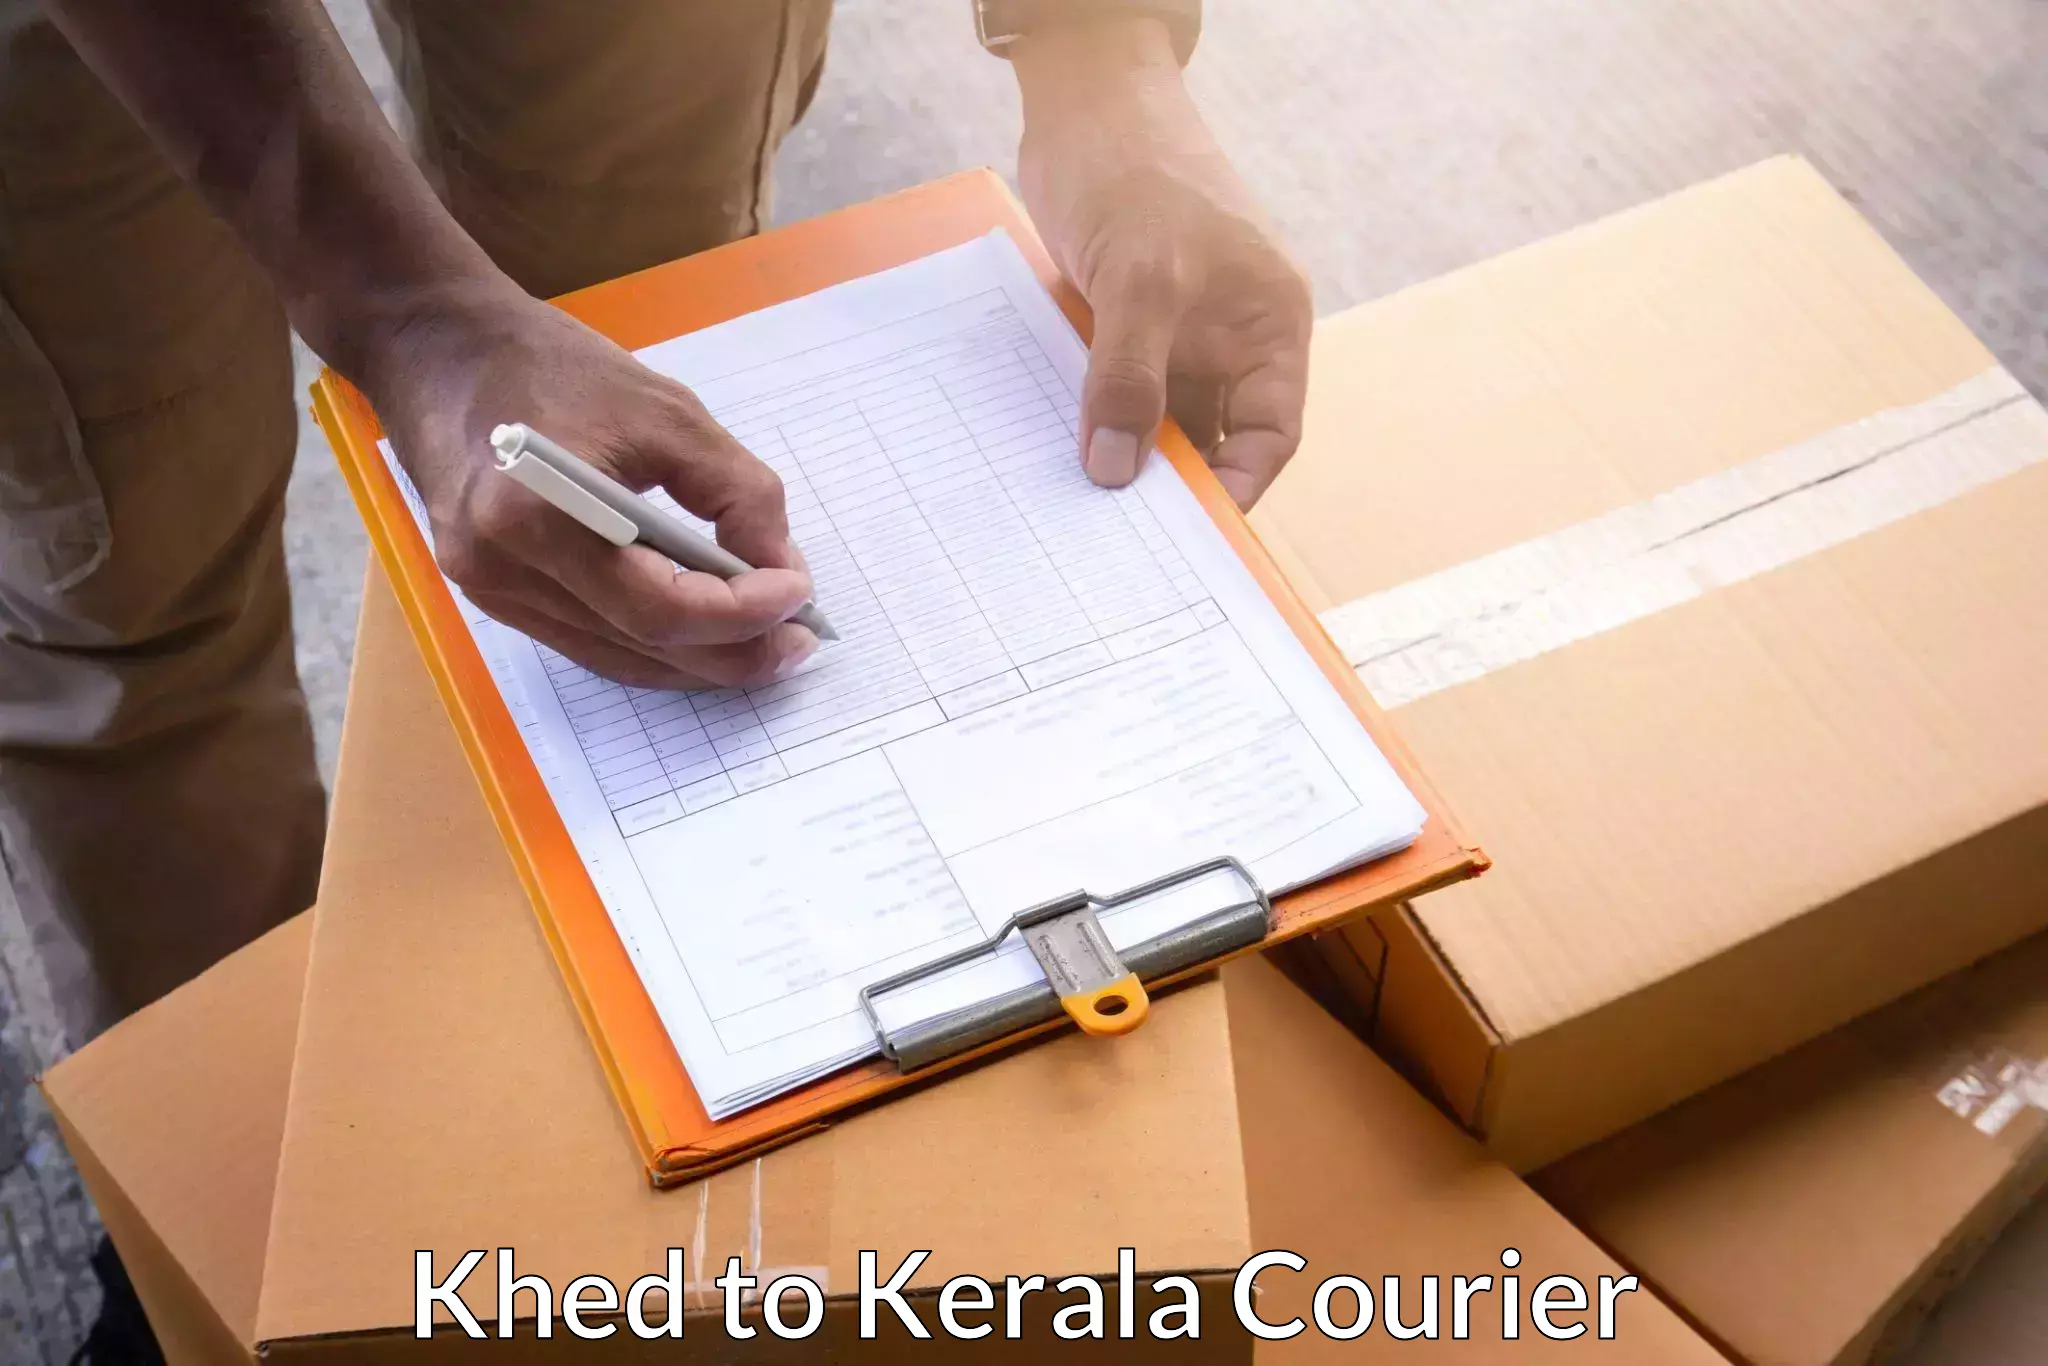 On-call courier service Khed to Adur Kla